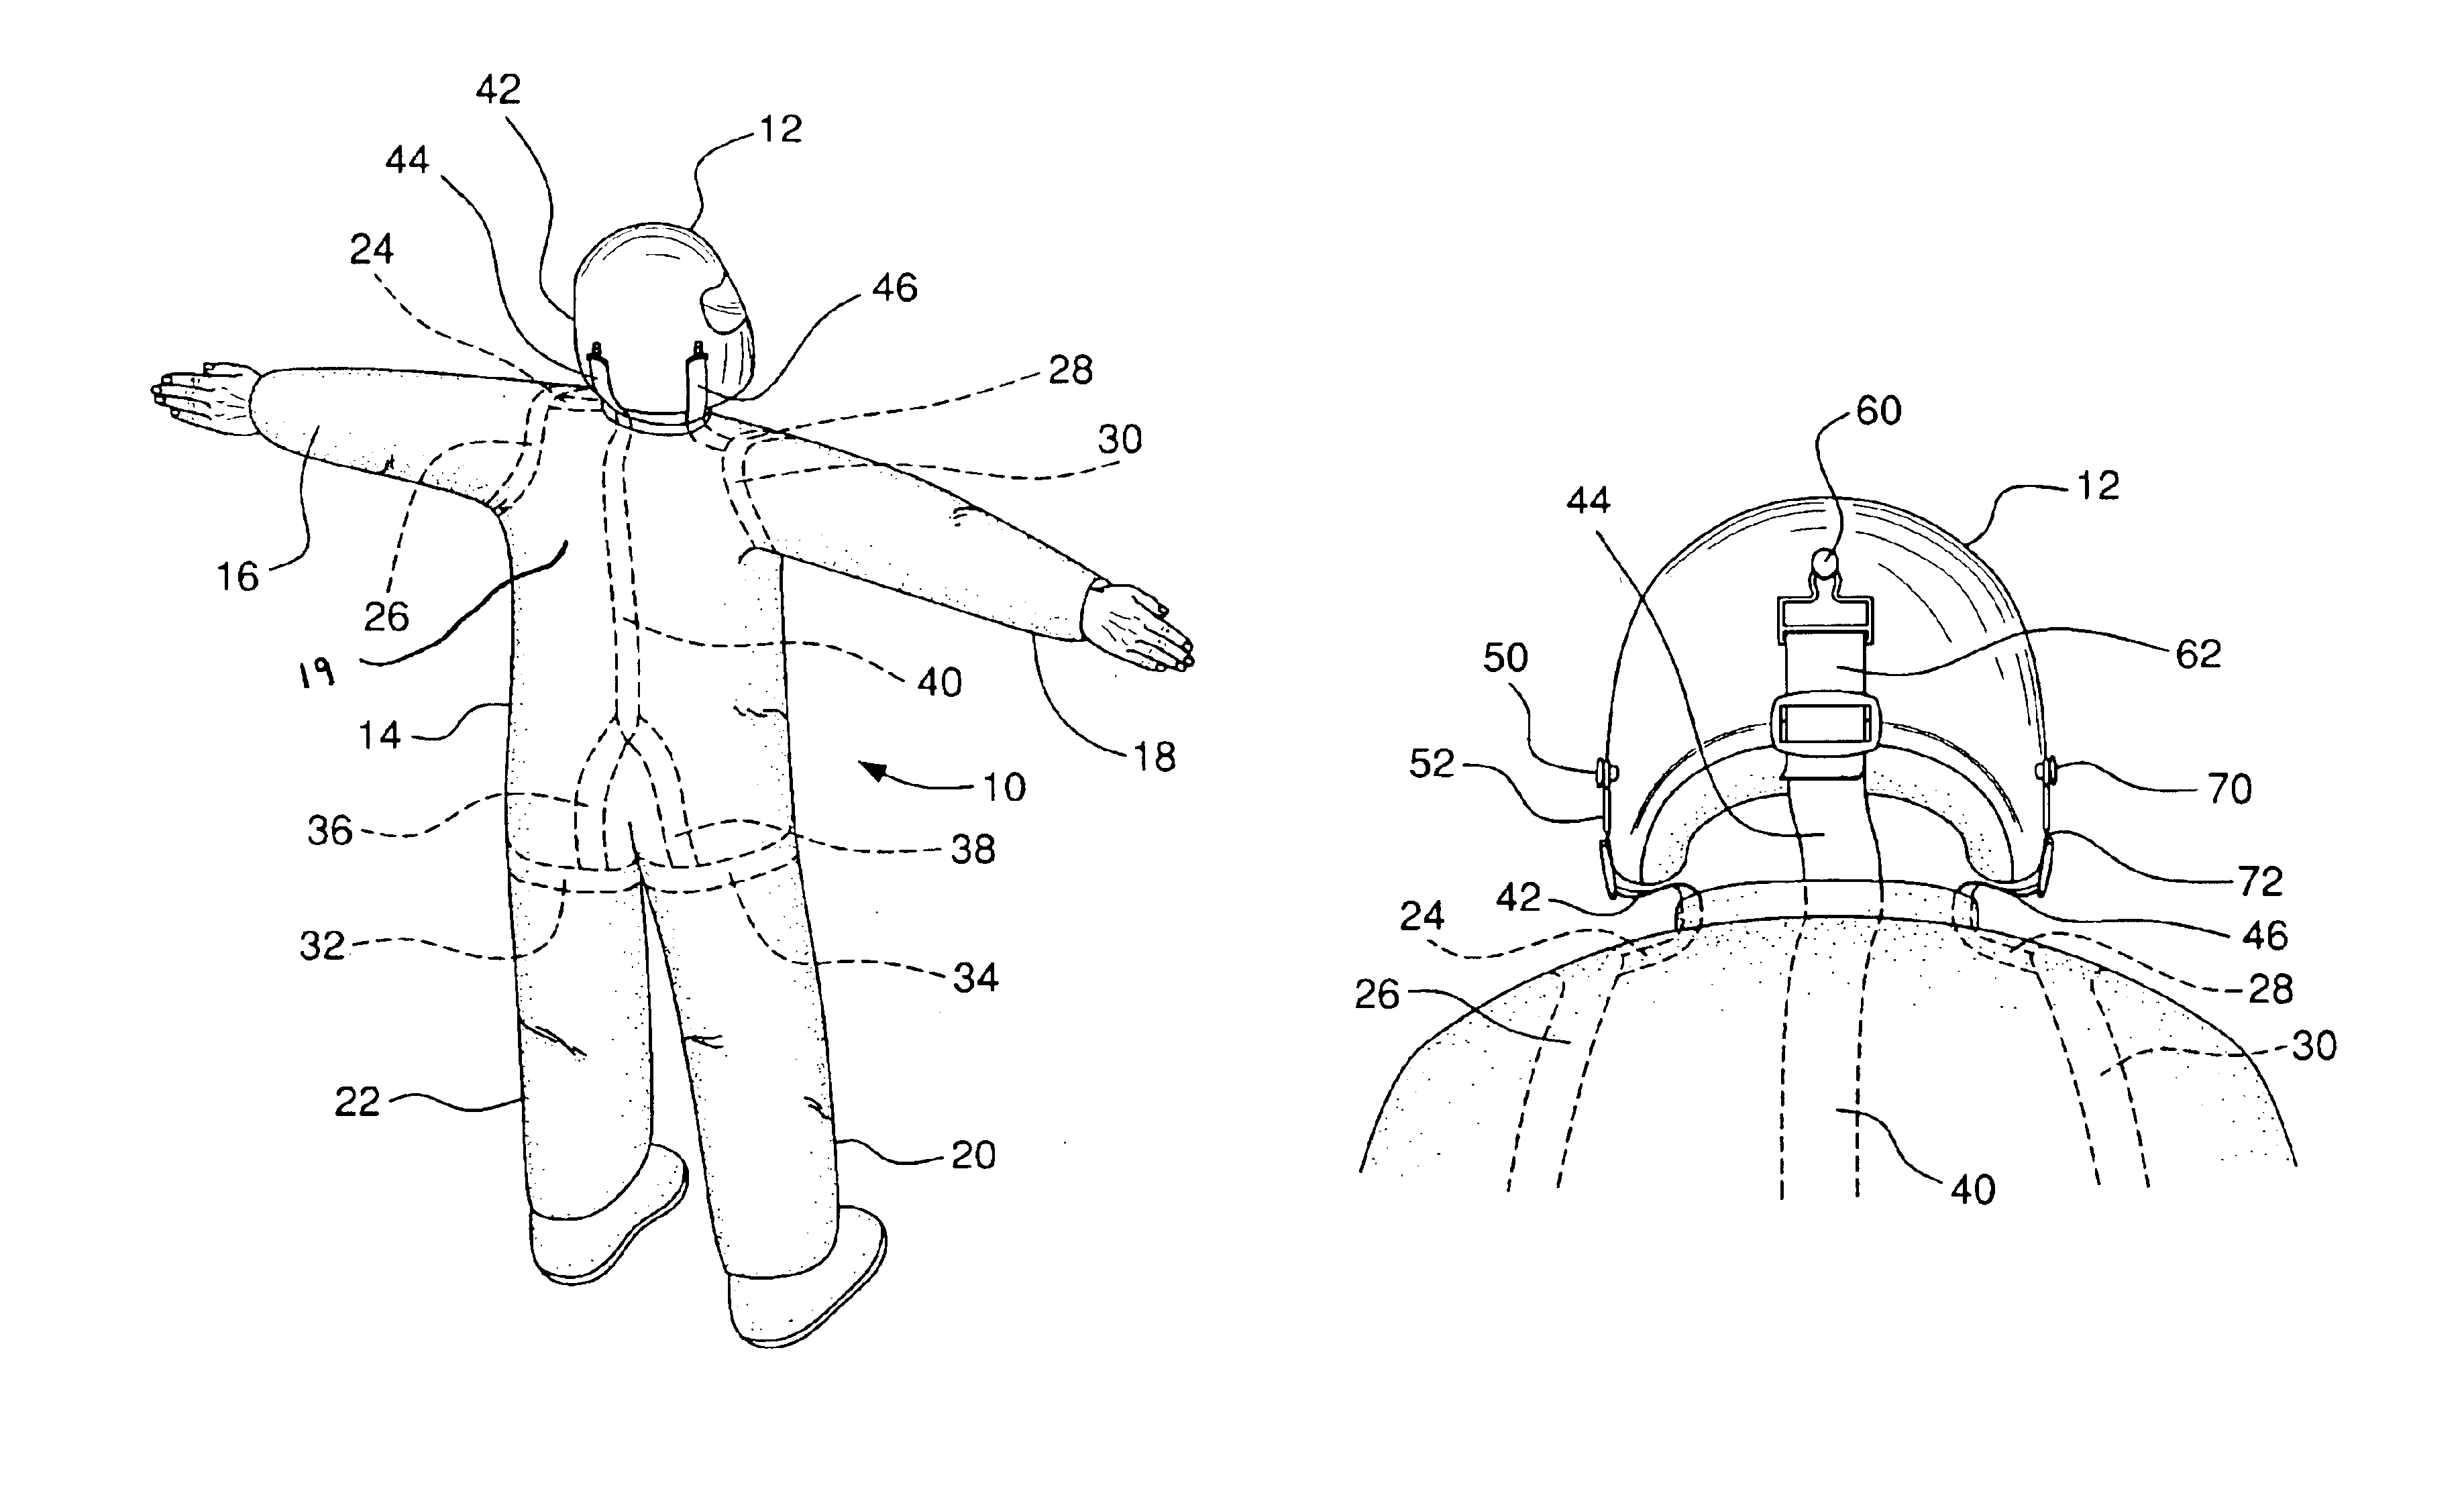 Safety device and system for head and neck stabilization